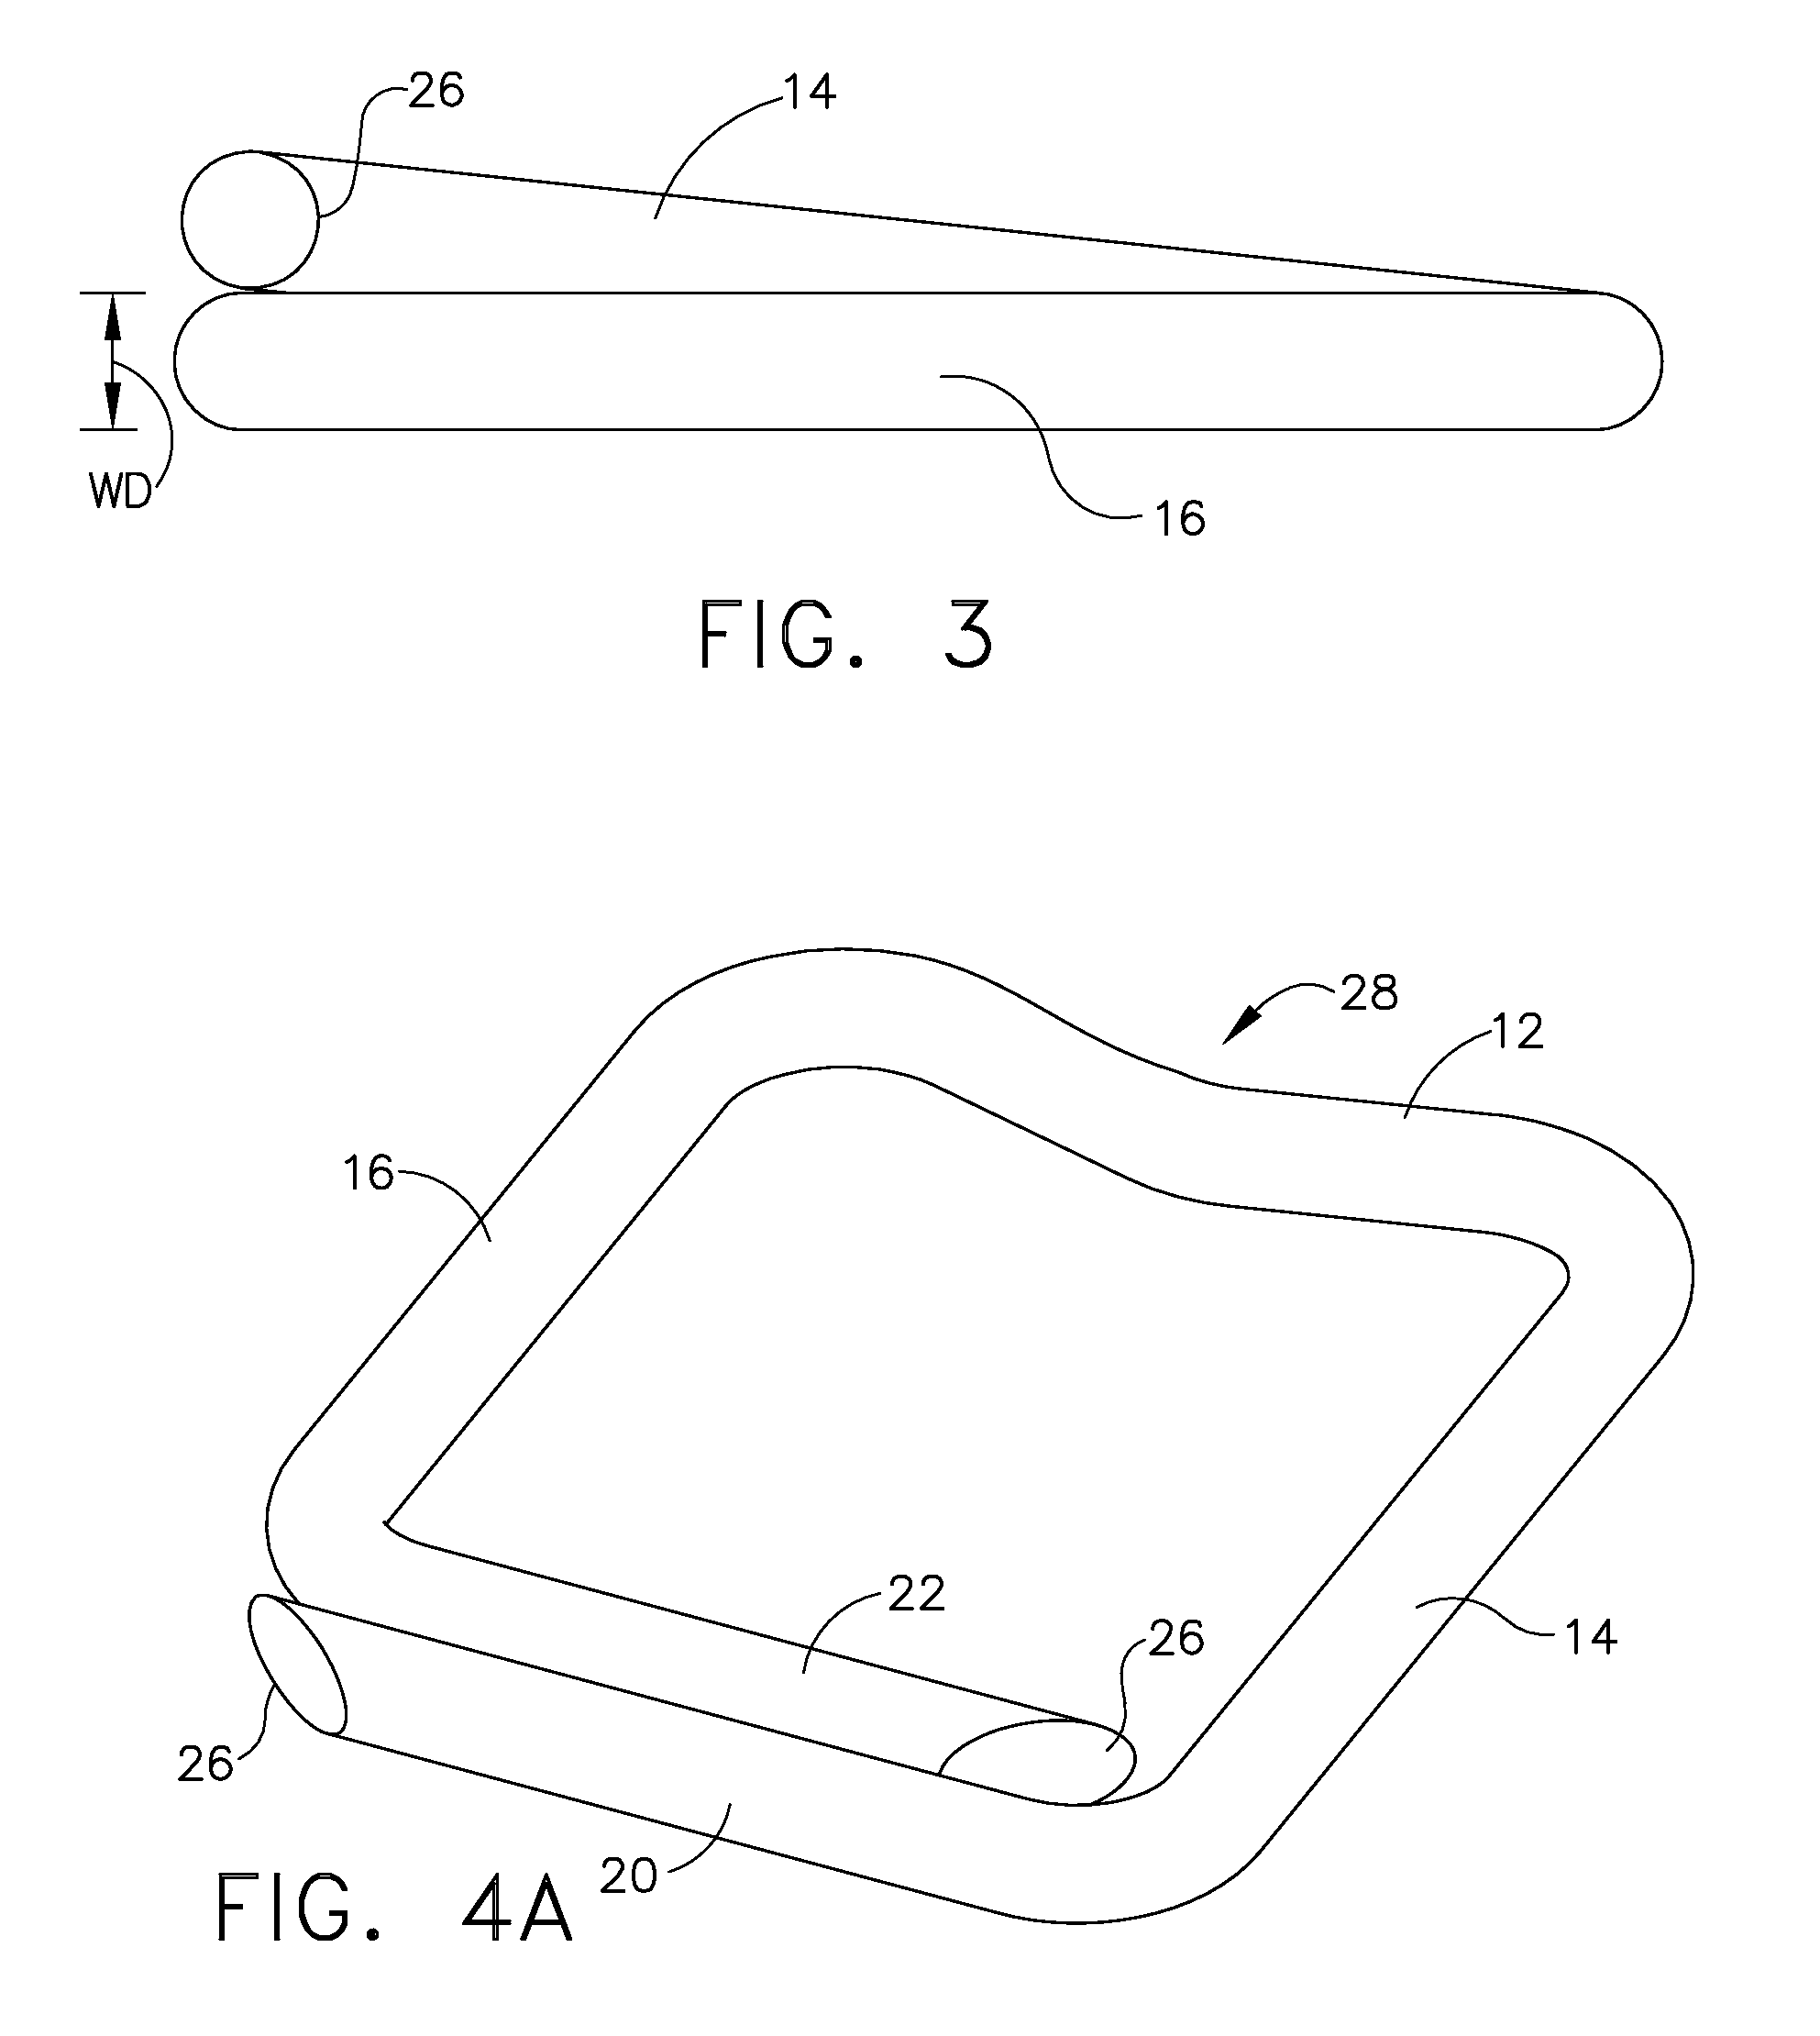 Surgical stapler for applying a large staple through small delivery port and a method of using the stapler to secure a tissue fold